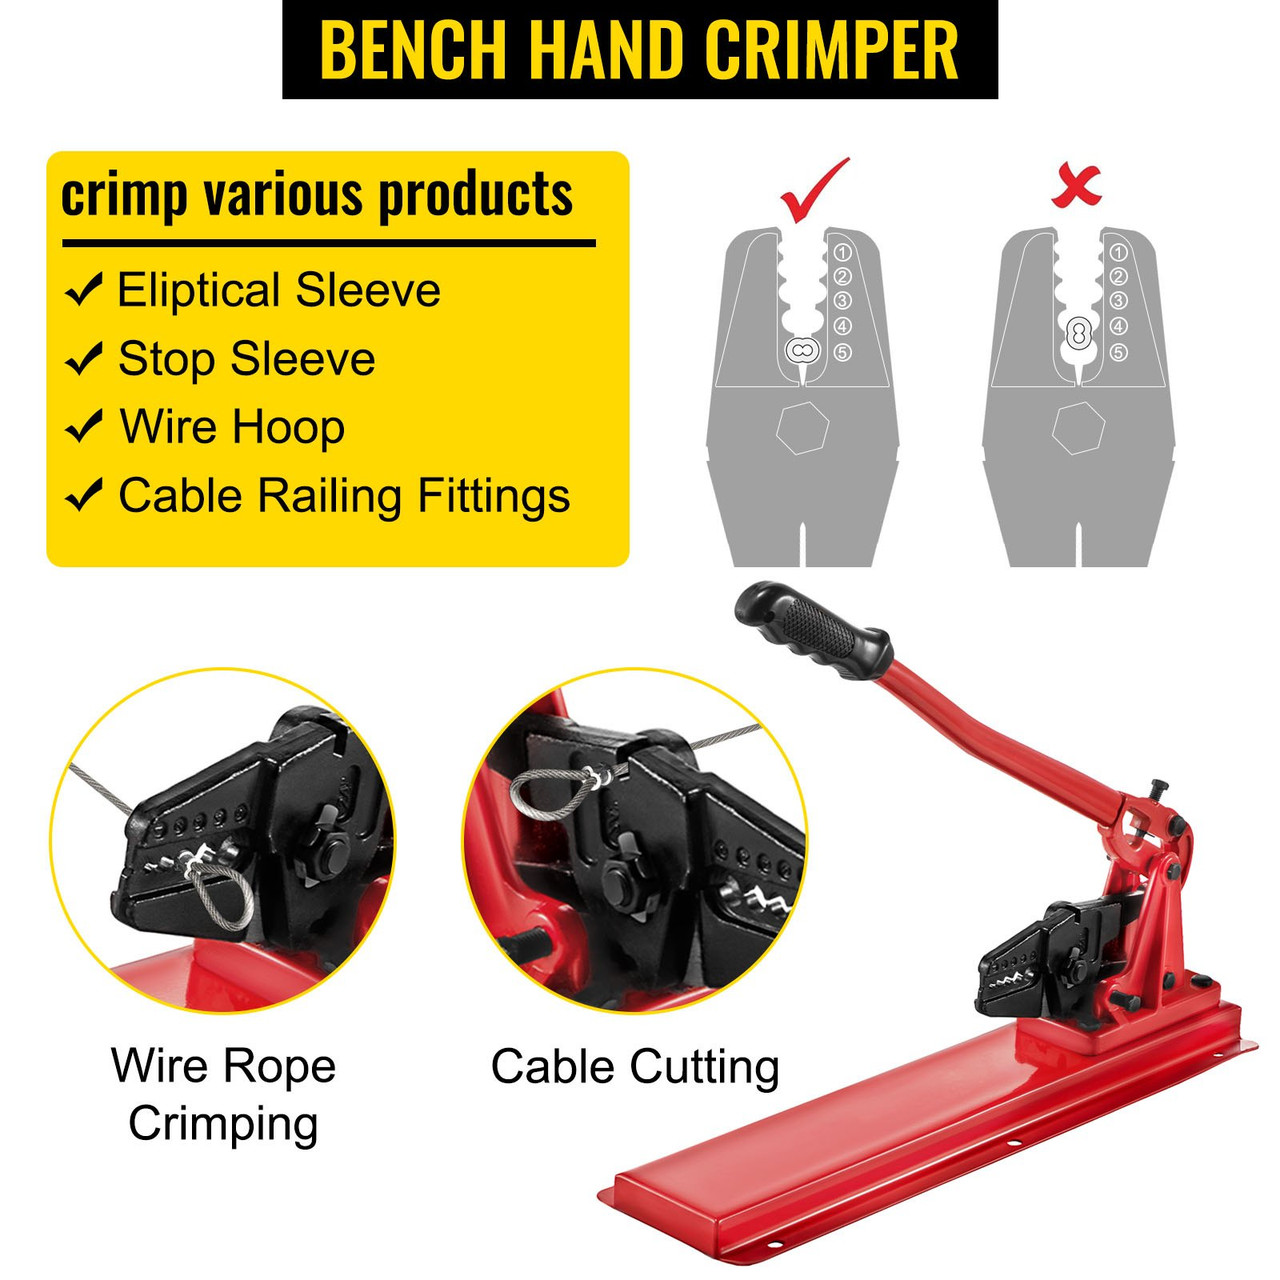 Bench Swager Tool 24" Wire Rope Swaging Tool w/Crimper Cable Bolt Cutter Head Bench Crimper 1/16"-3/16" Aluminum/Copper Sleeves Bench Cable Alloy Steel Crimper Swager for1/2" Wire Rope Ferrules